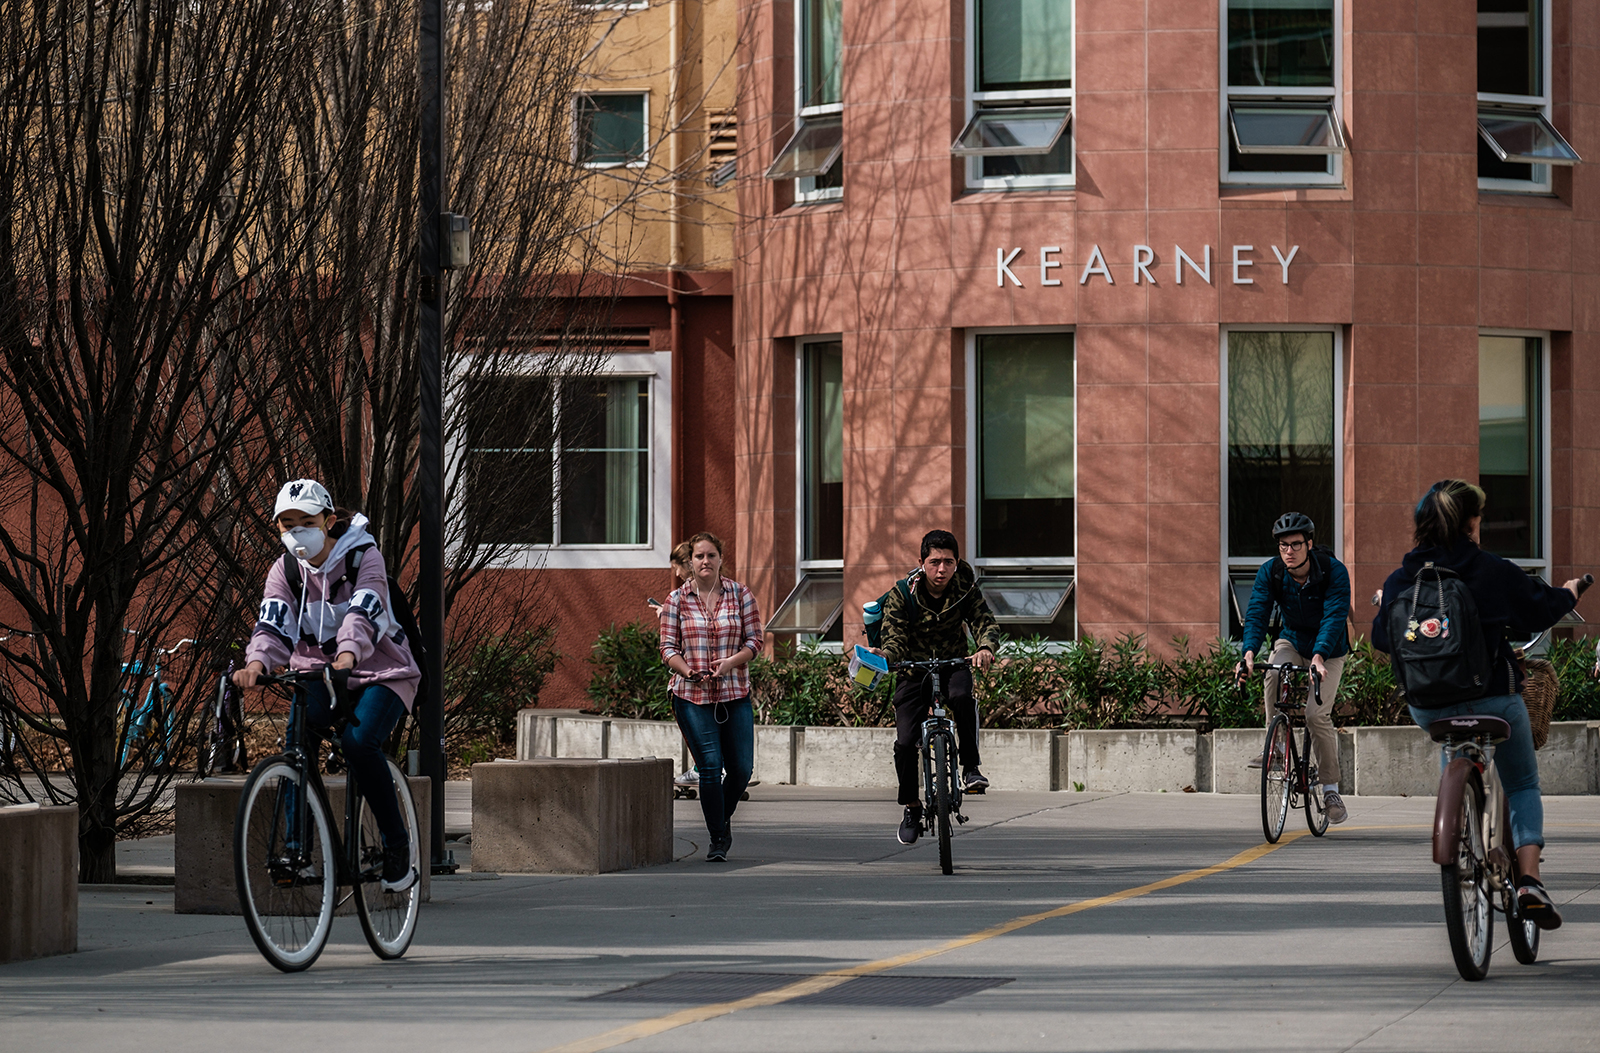 Students cycle past Kearney Hall on the campus of UC Davis on February 28 in Davis, California.